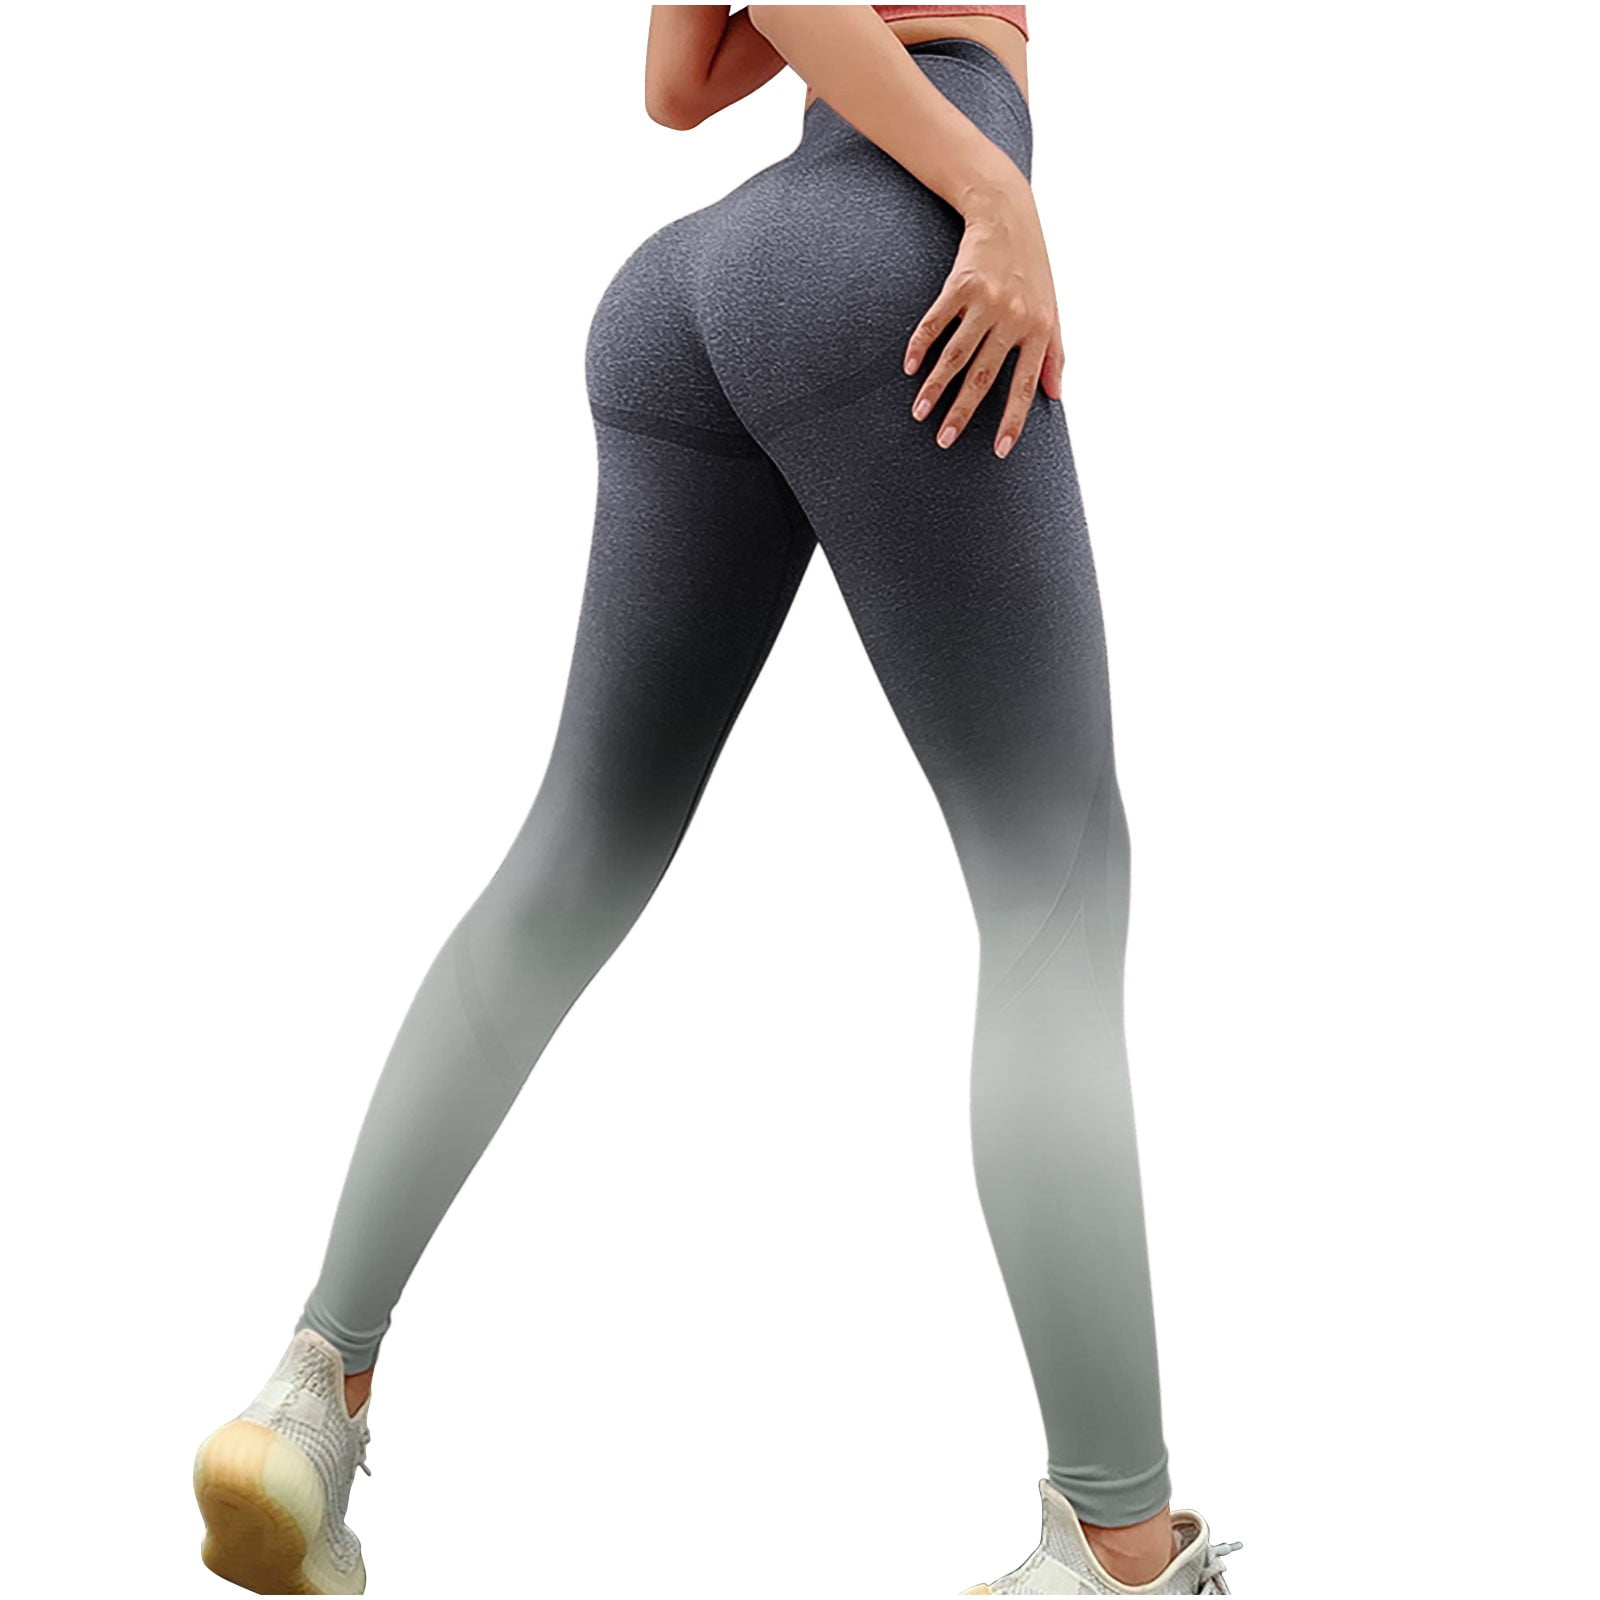 Youloveit Womens High Waist Seamless Leggings Mesh Breathable Ankle Yoga  Pants Workout Tight Leggings Gym Sport